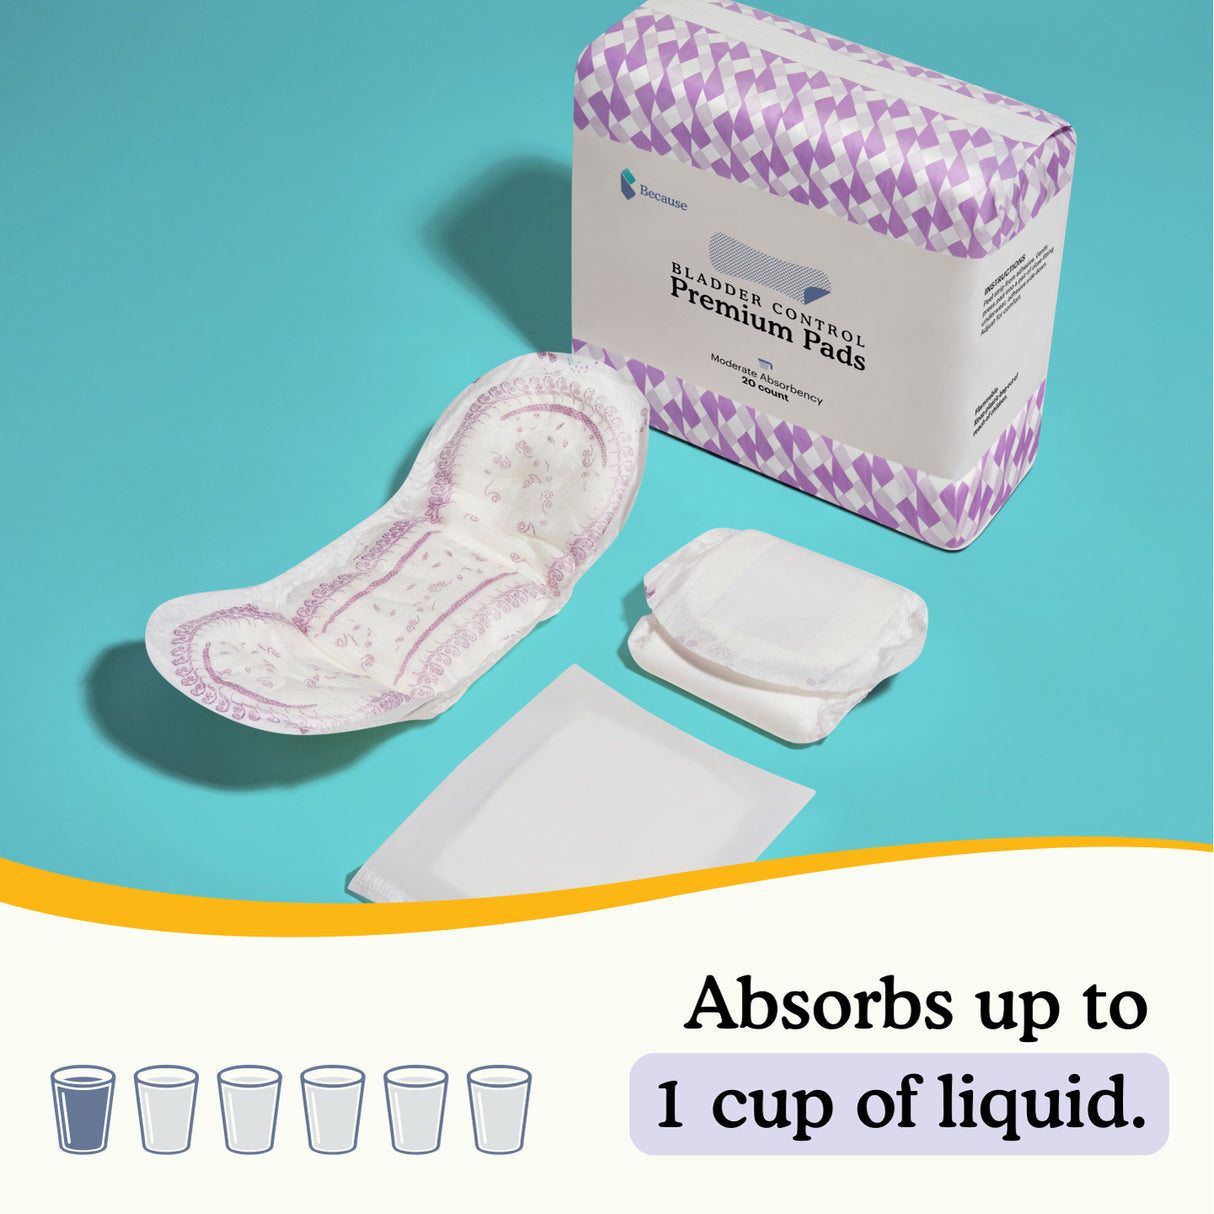 Moderate pads absorb up to 1 cup of liquid